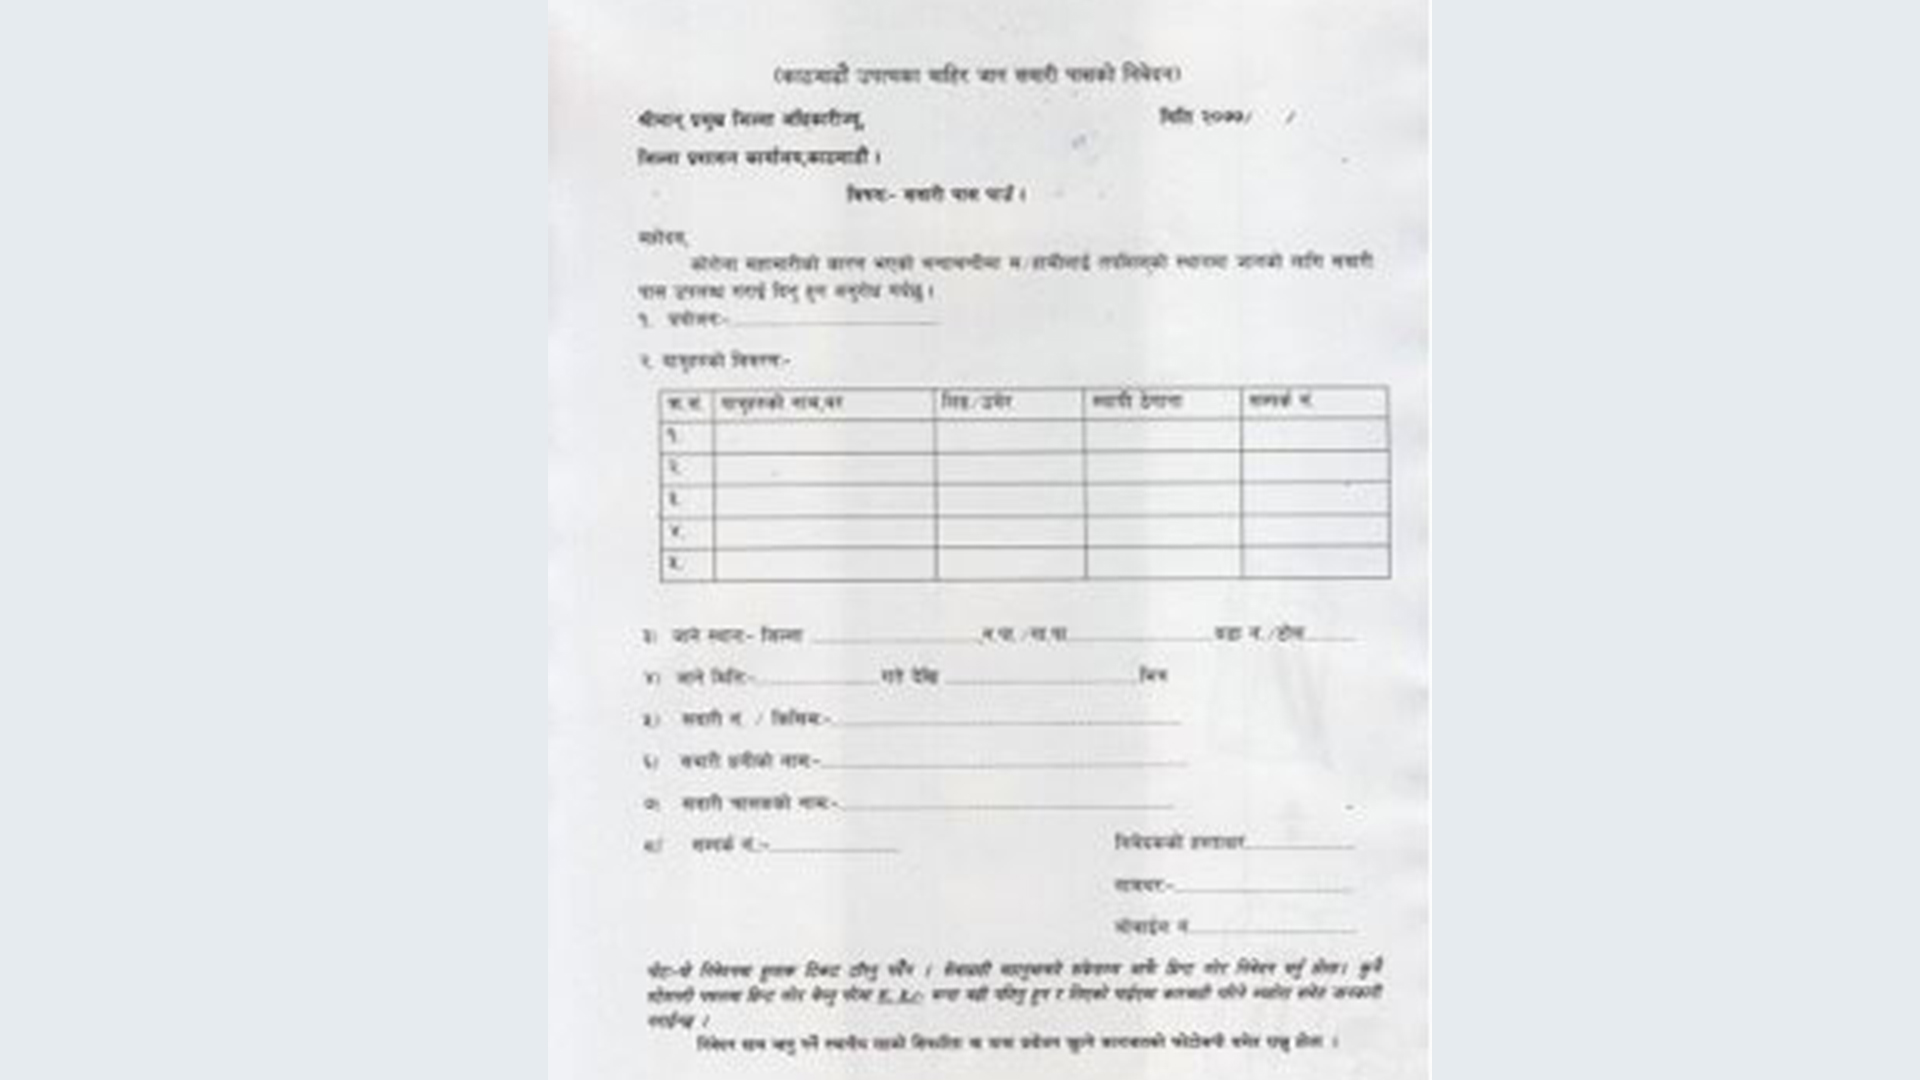 Kathmandu DAO issues form for permission to leave the Valley